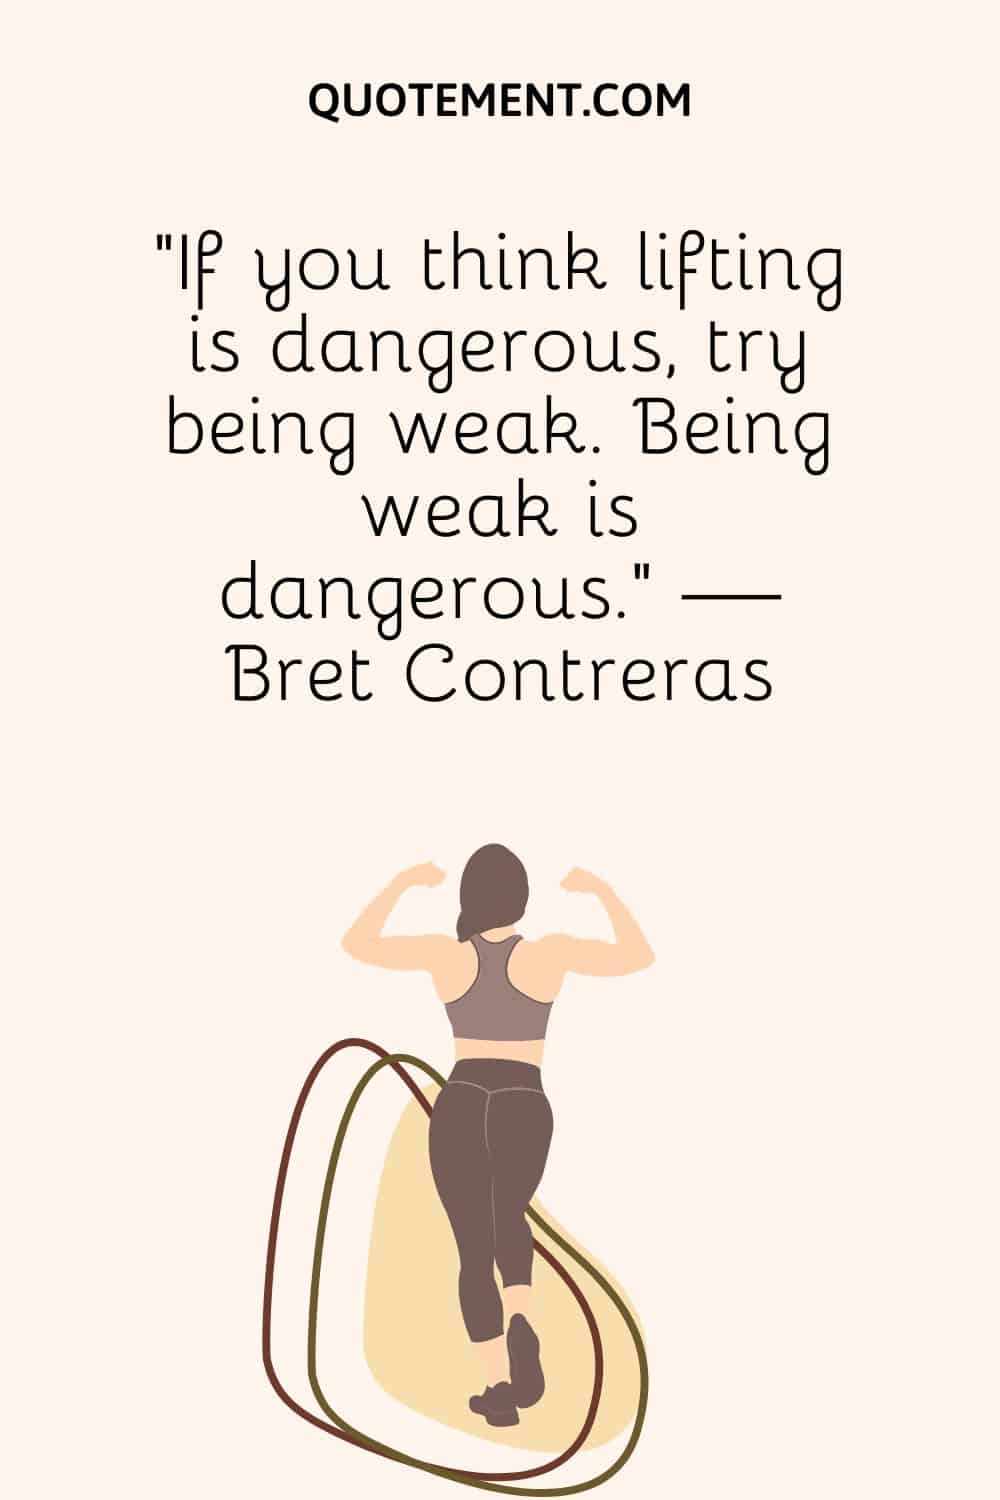 image of a fitness girl representing inspiring lifting quote